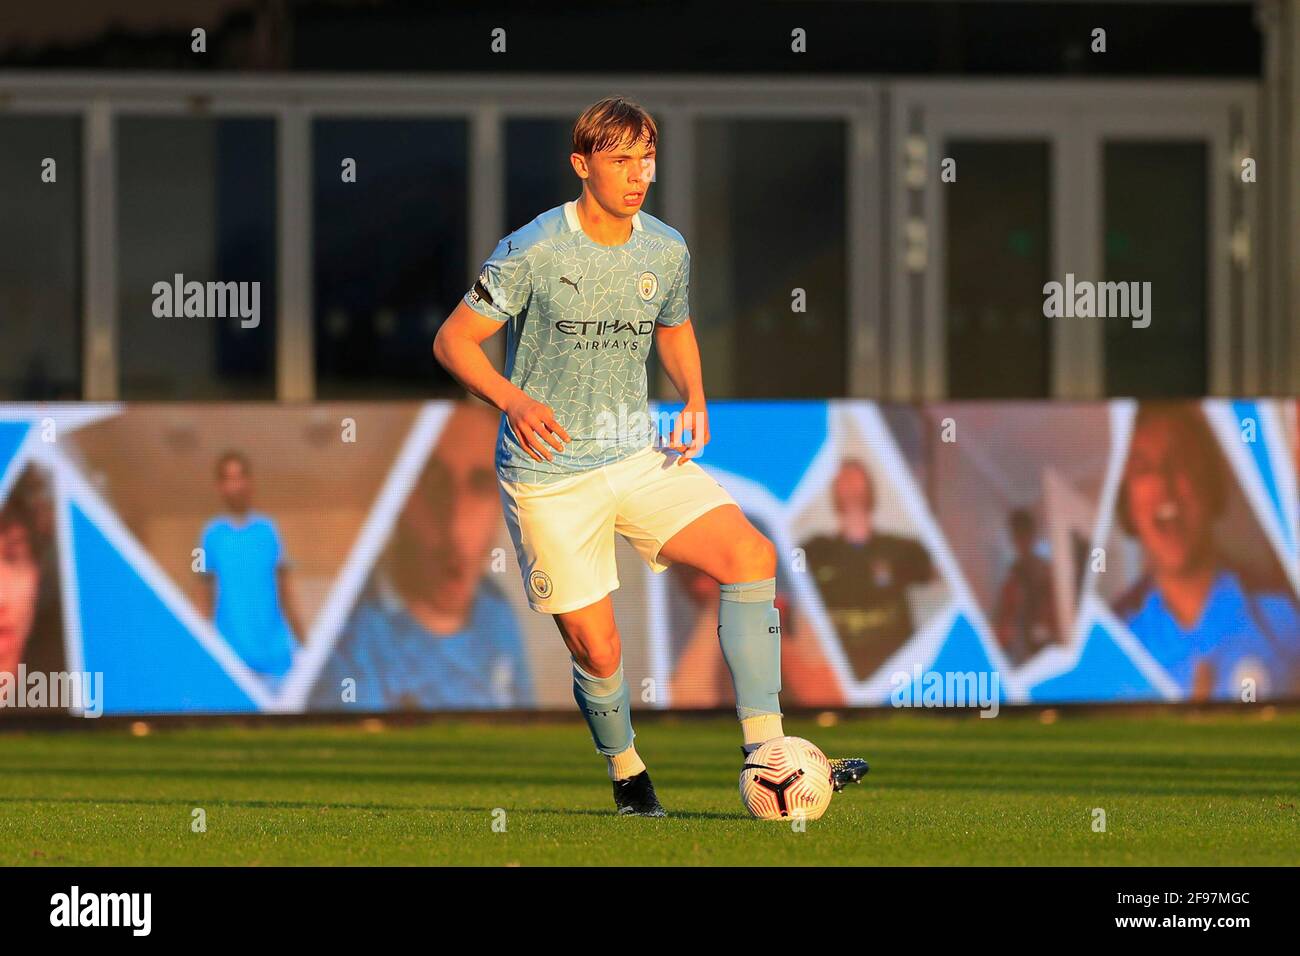 Manchester, UK. 16th Apr, 2021. Callum Doyle #4 of Manchester City in Manchester, UK on 4/16/2021. (Photo by Conor Molloy/News Images/Sipa USA) Credit: Sipa USA/Alamy Live News Stock Photo